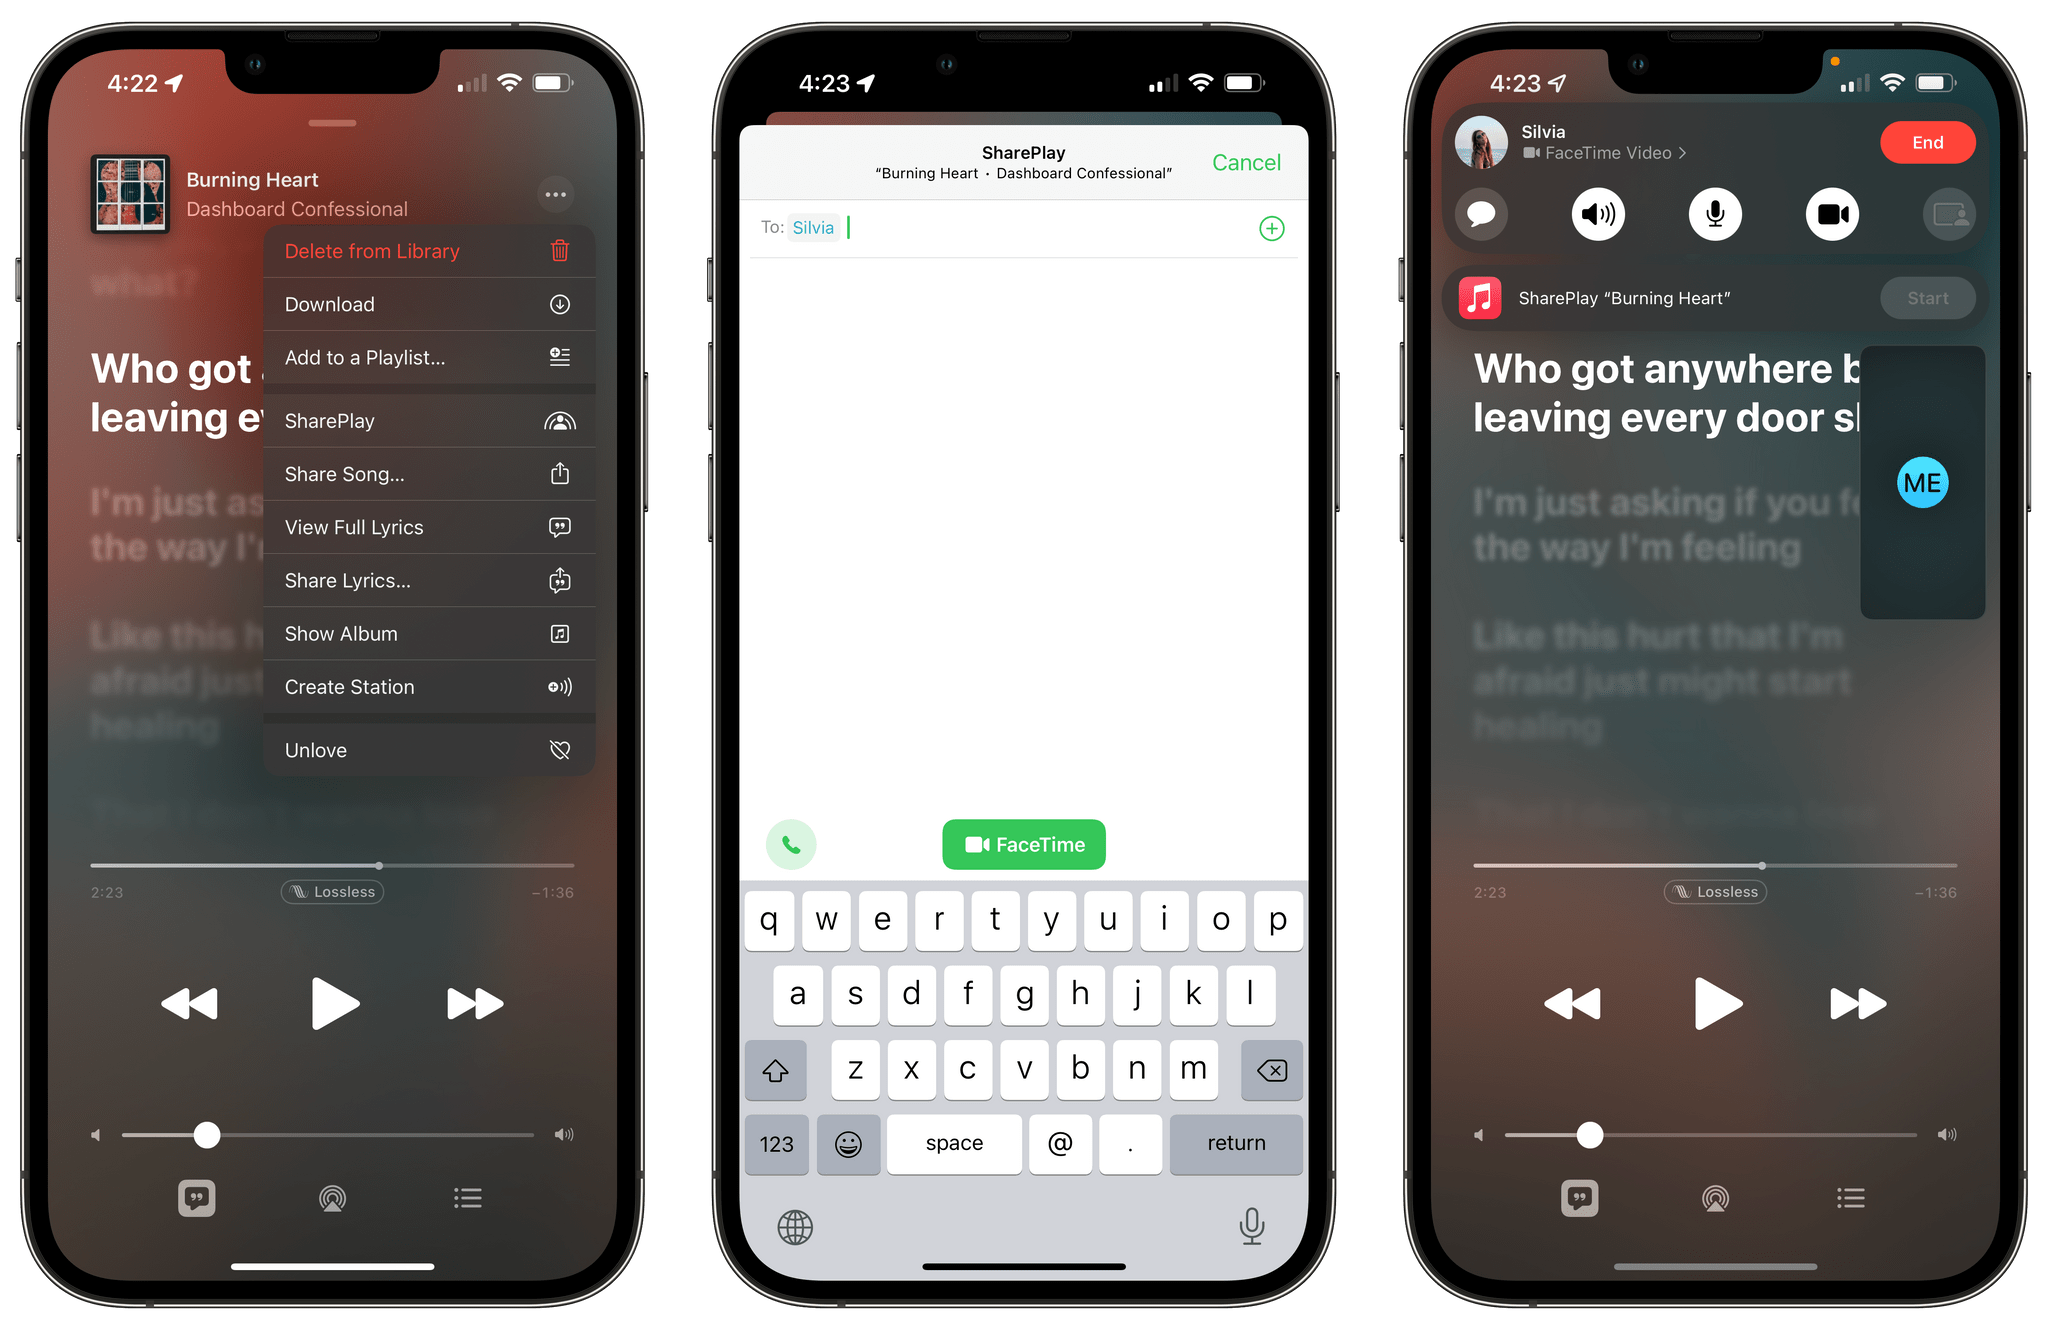 In iOS 15.4, you can start a FaceTime call and SharePlay session in a single step from Music.